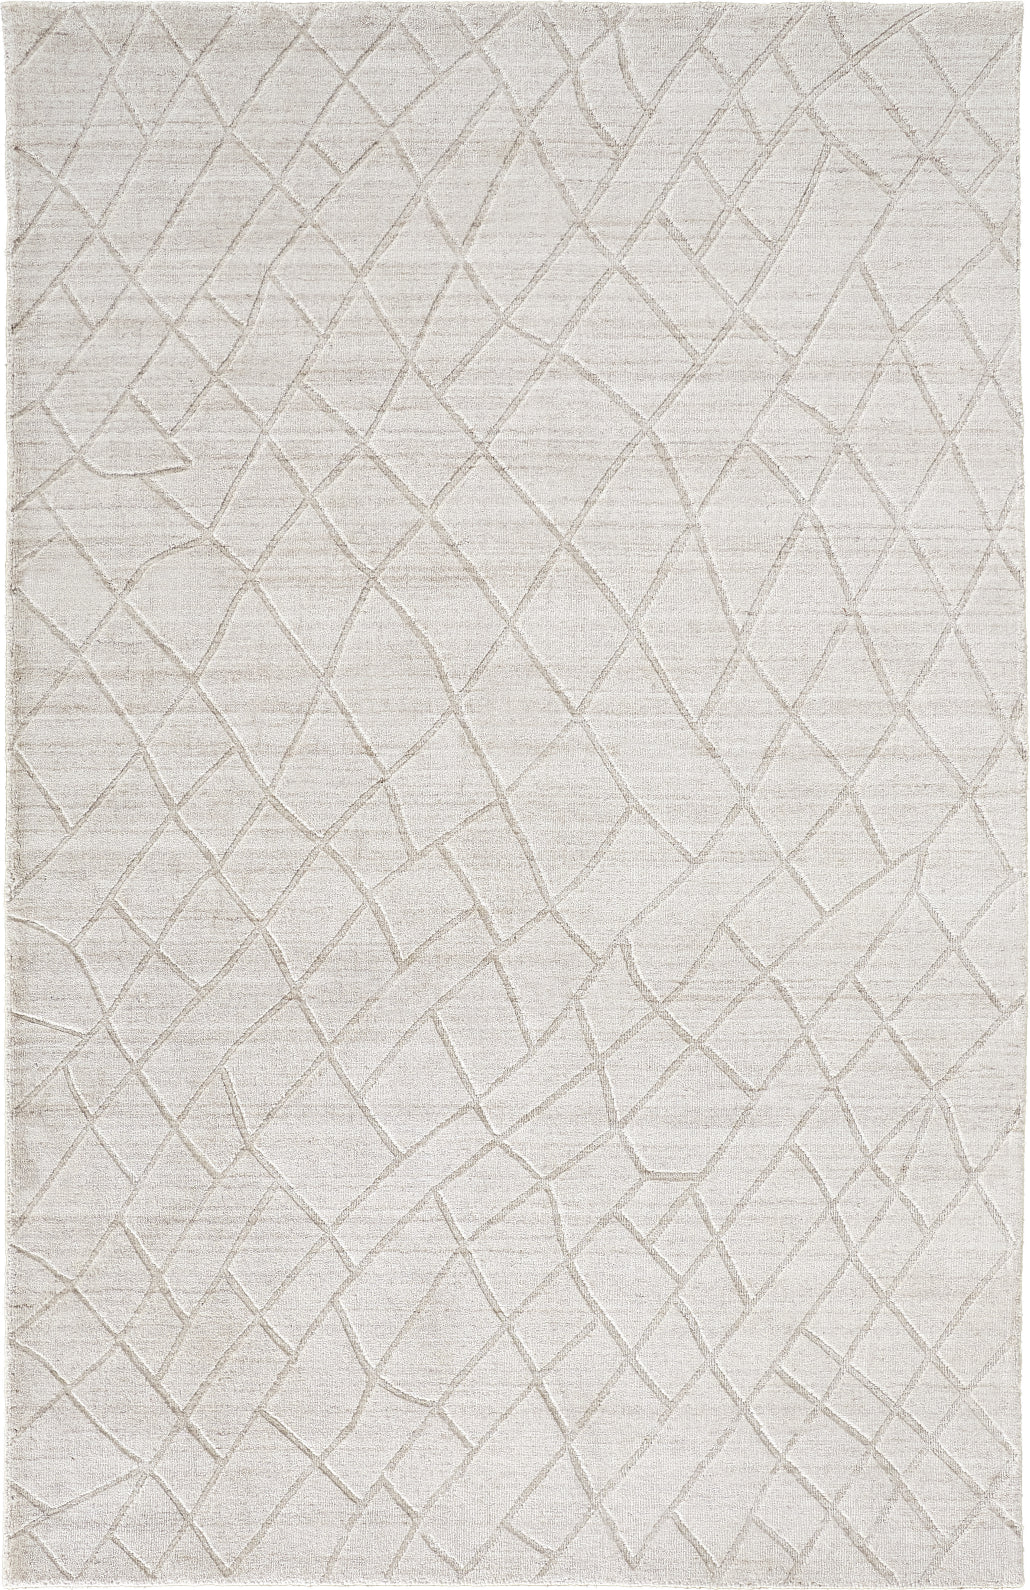 Feizy Redford 8846F Beige Area Rug main image